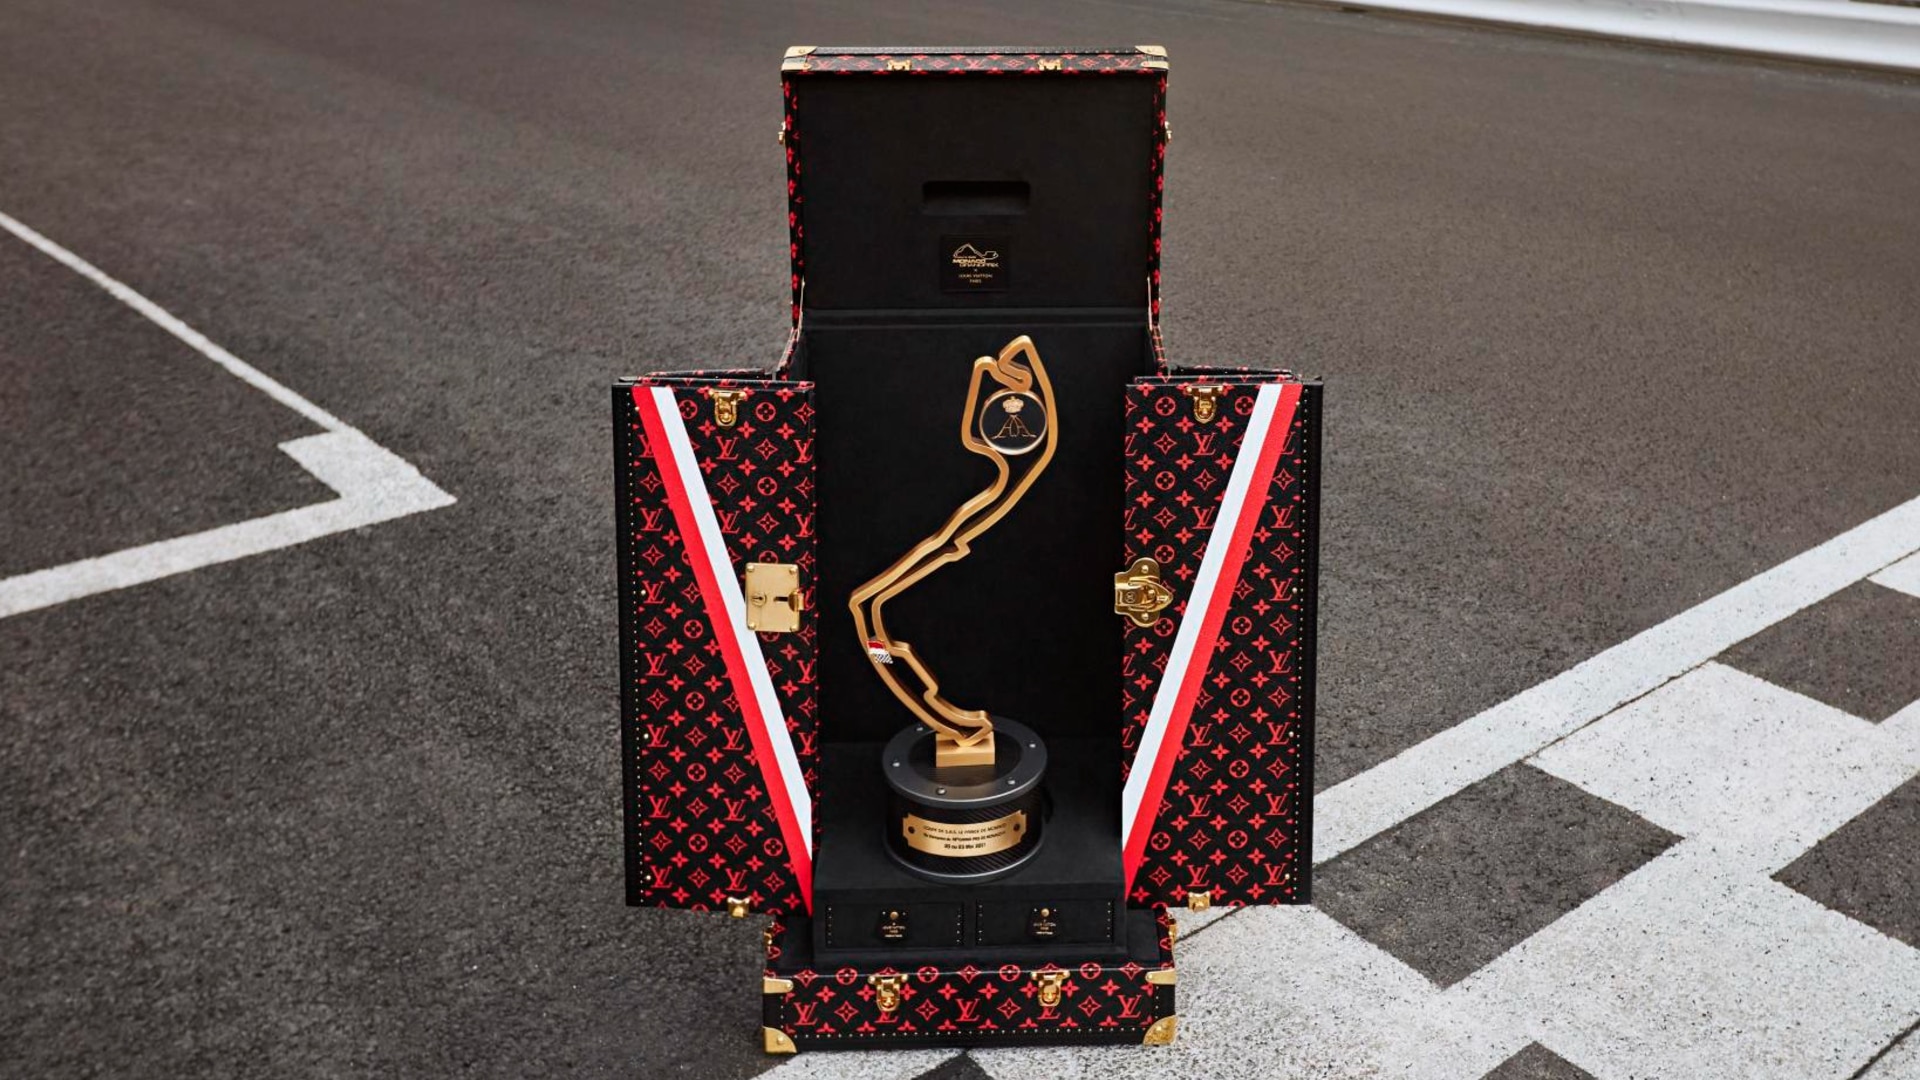 LOUIS VUITTON IS THE OFFICIAL TROPHY TRUNK PARTNER FOR THE